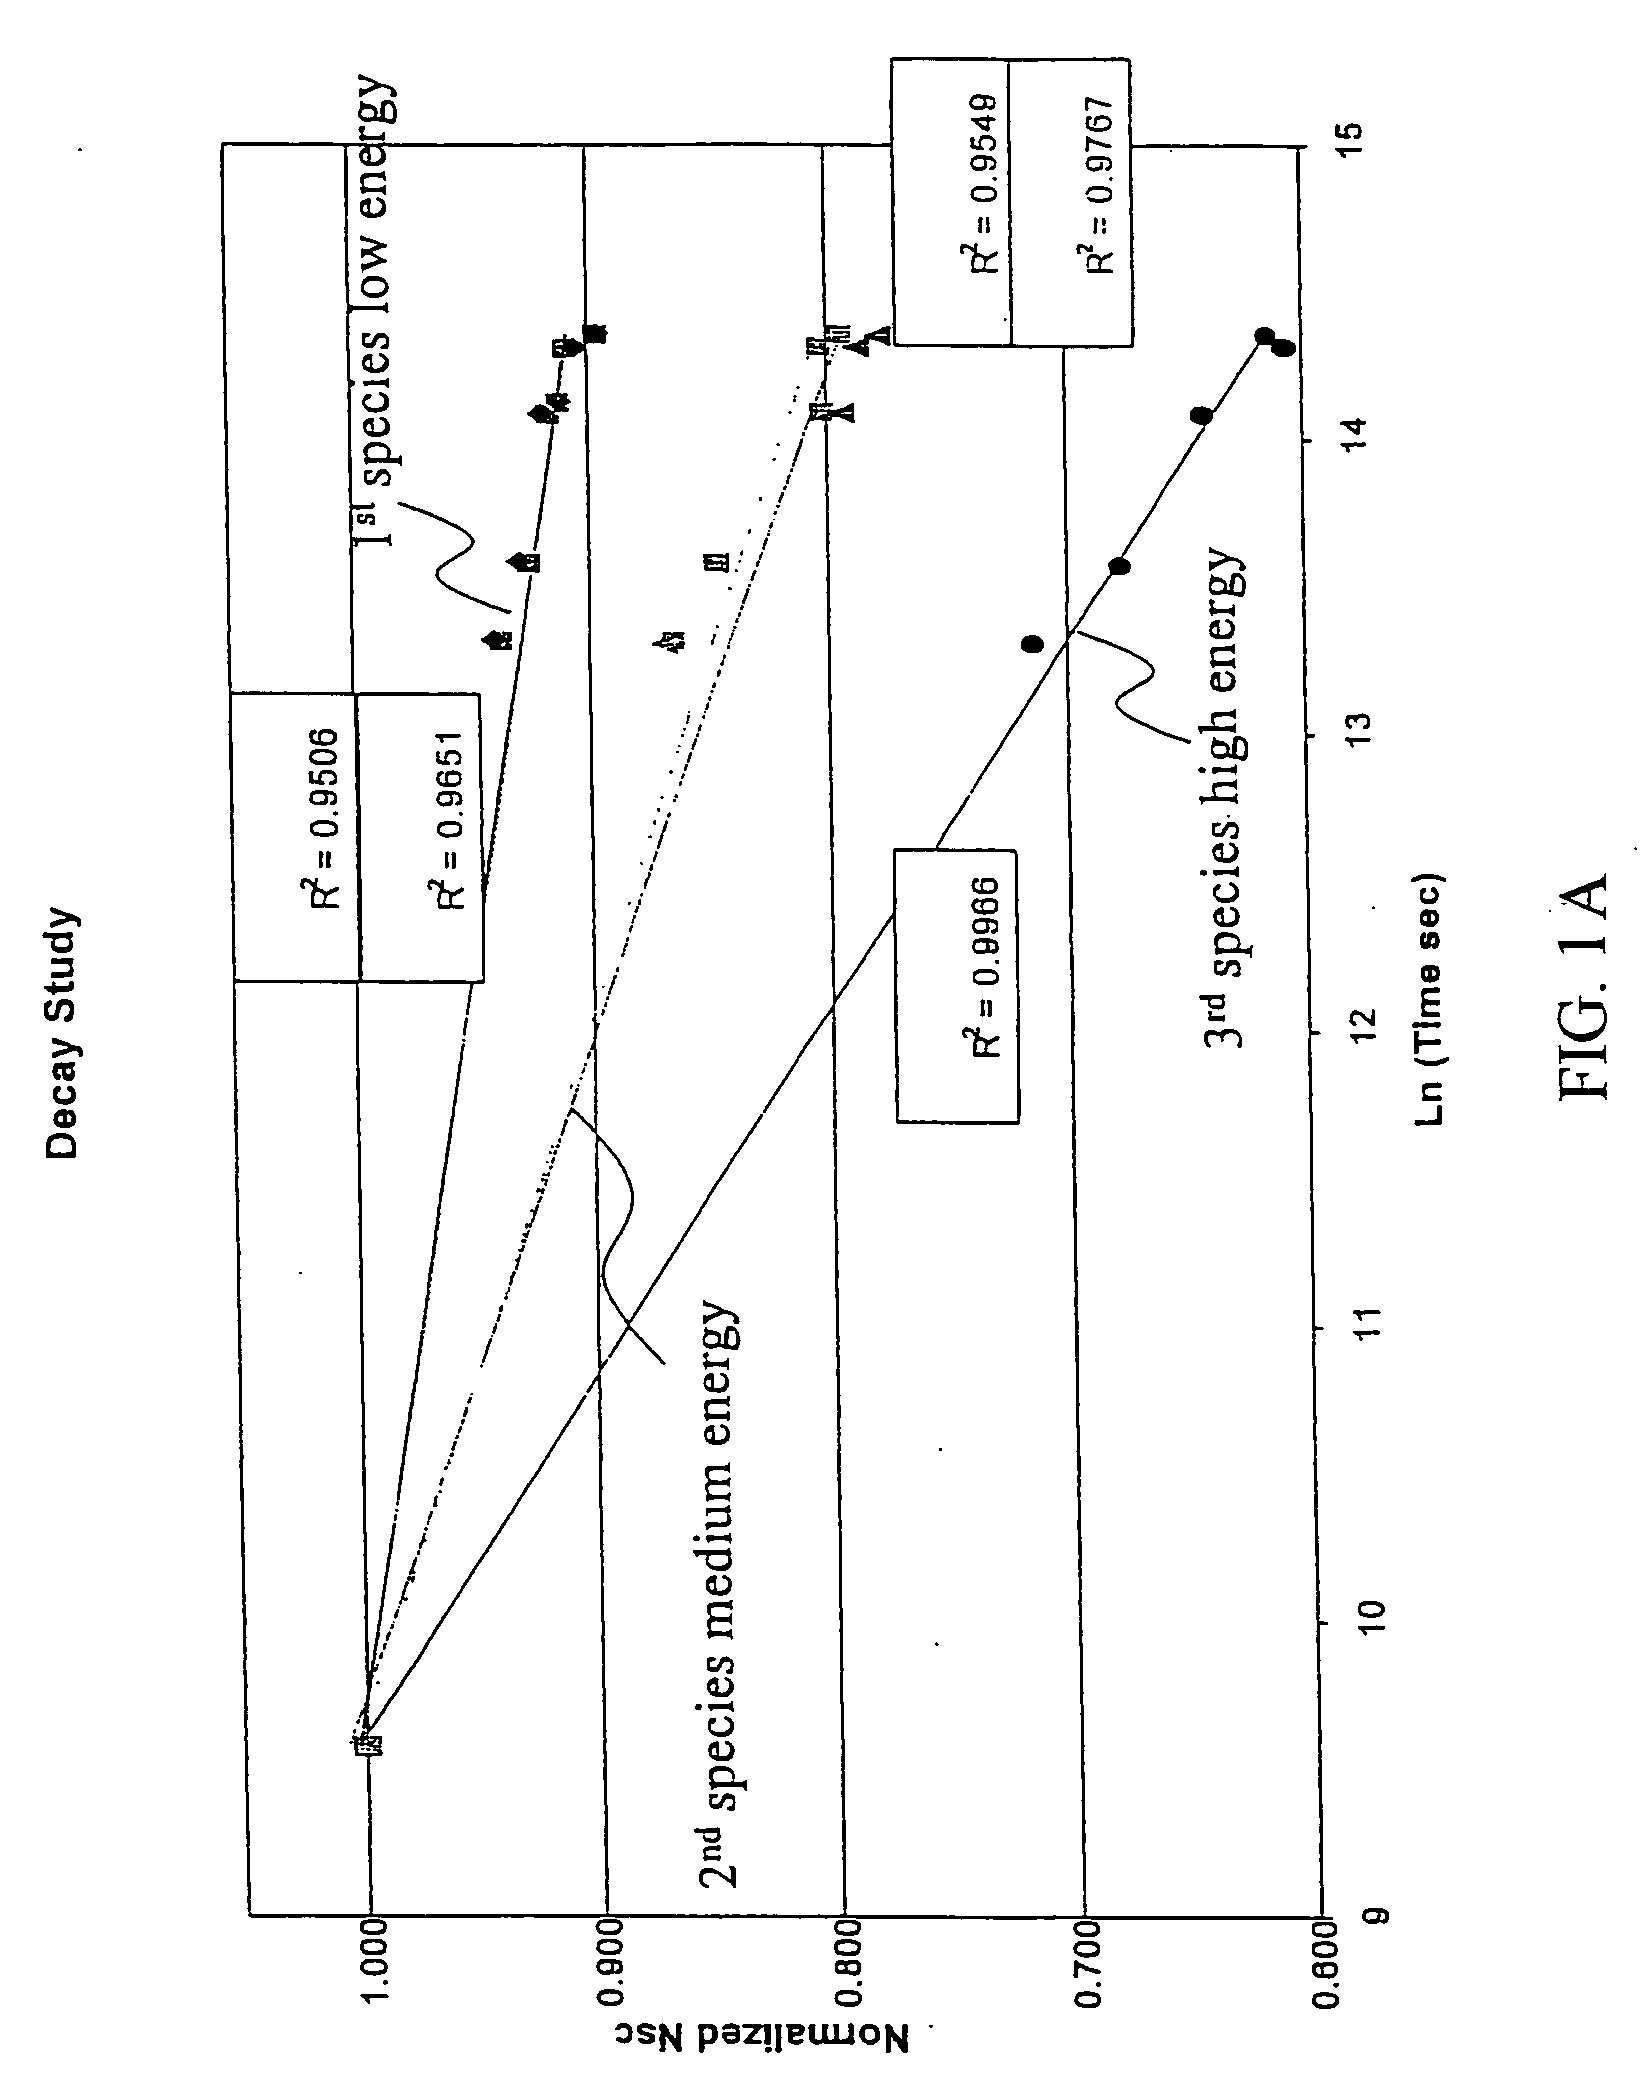 Semiconductor wafer metrology apparatus and methods